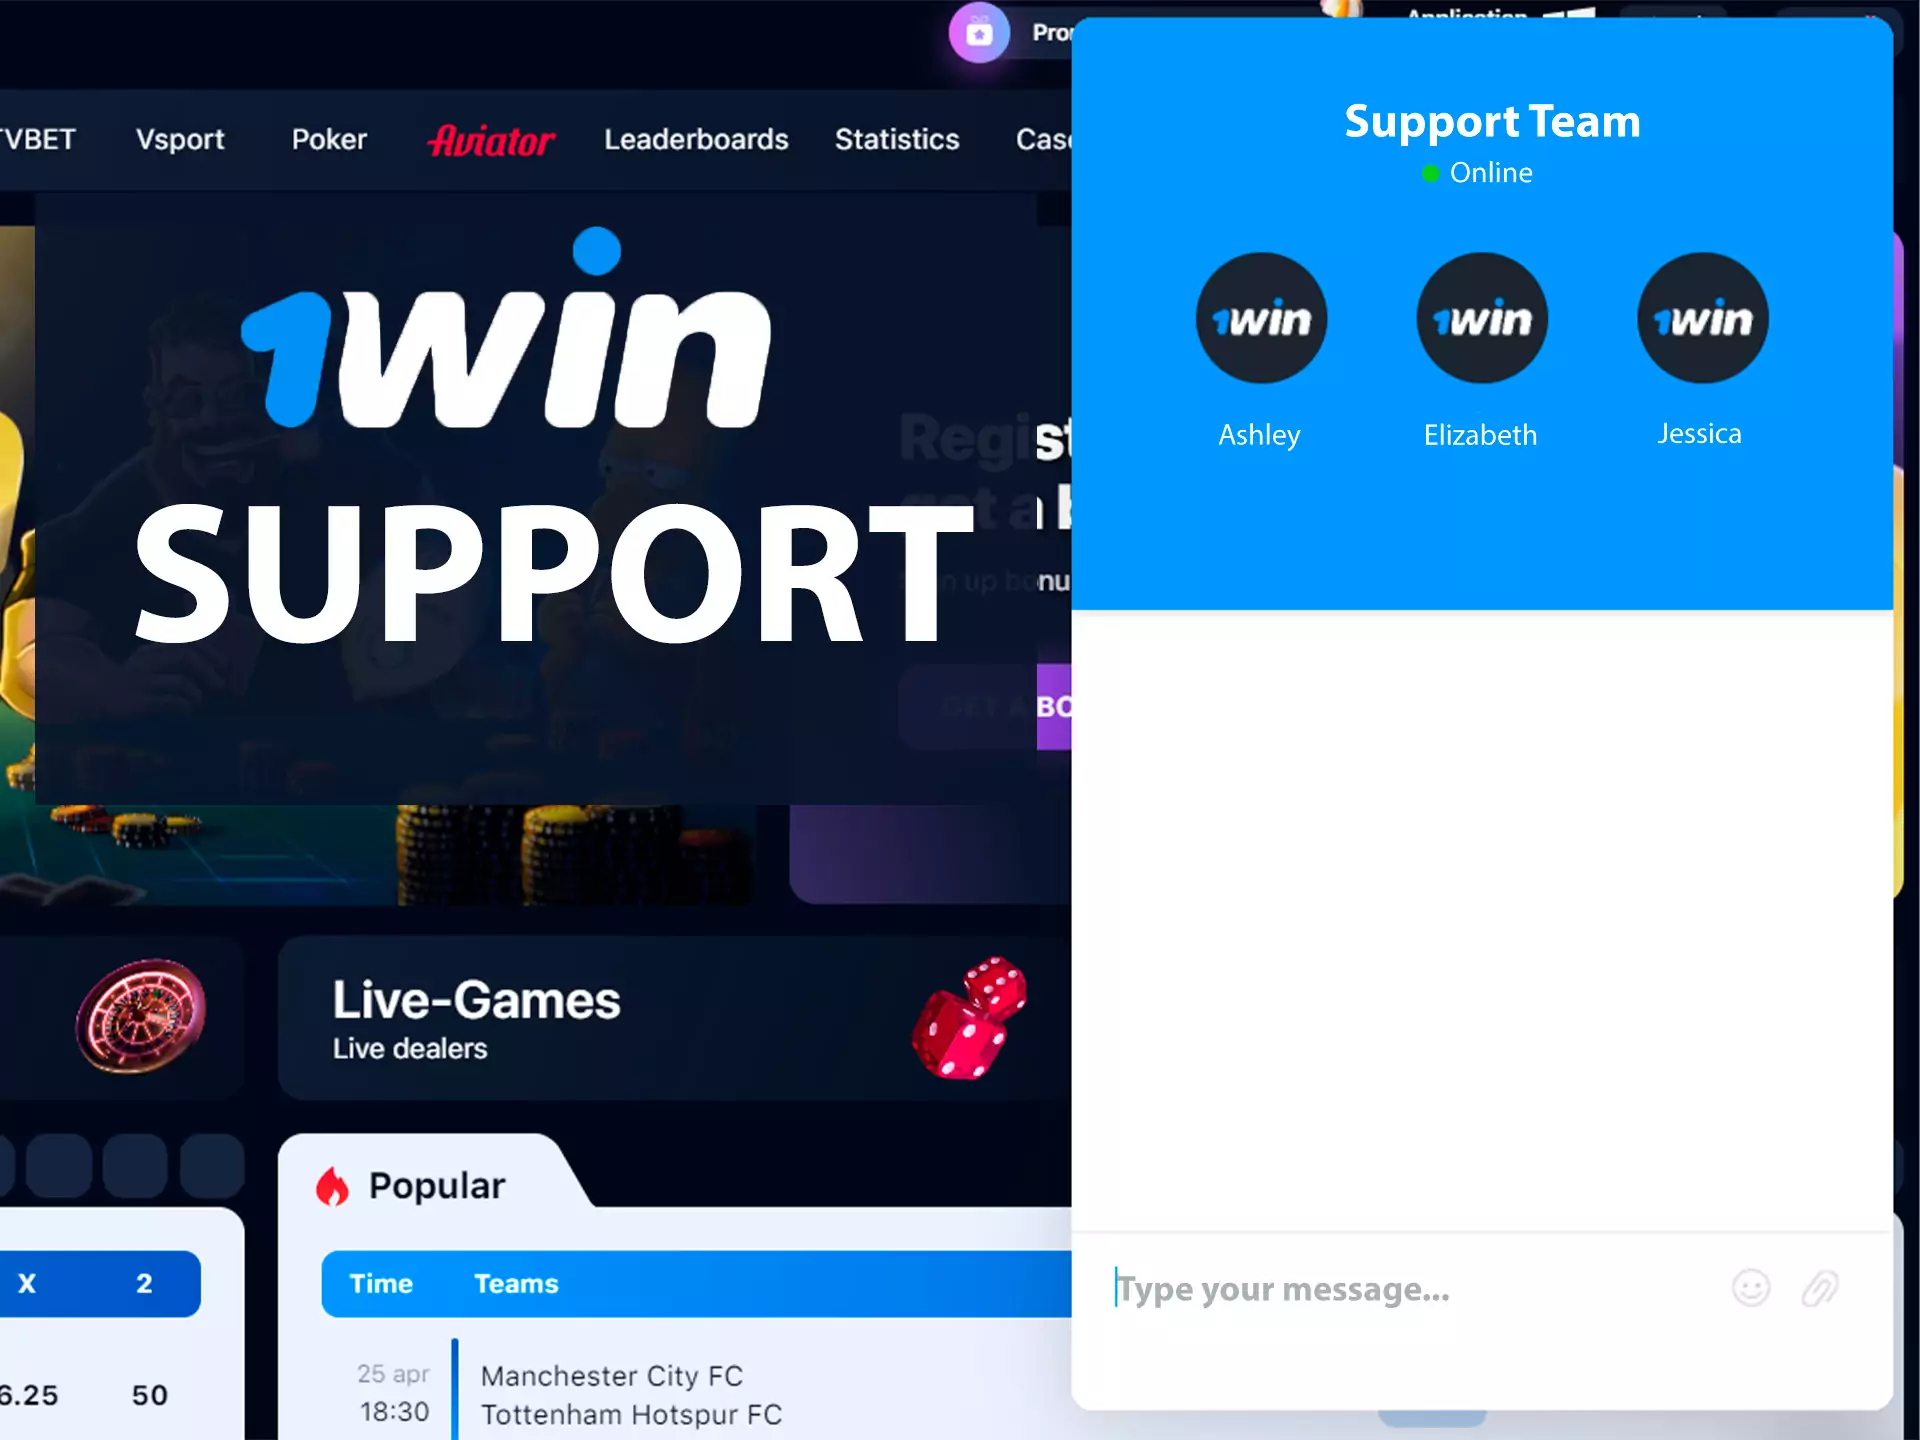 You can contact the 1win support team with any questions.